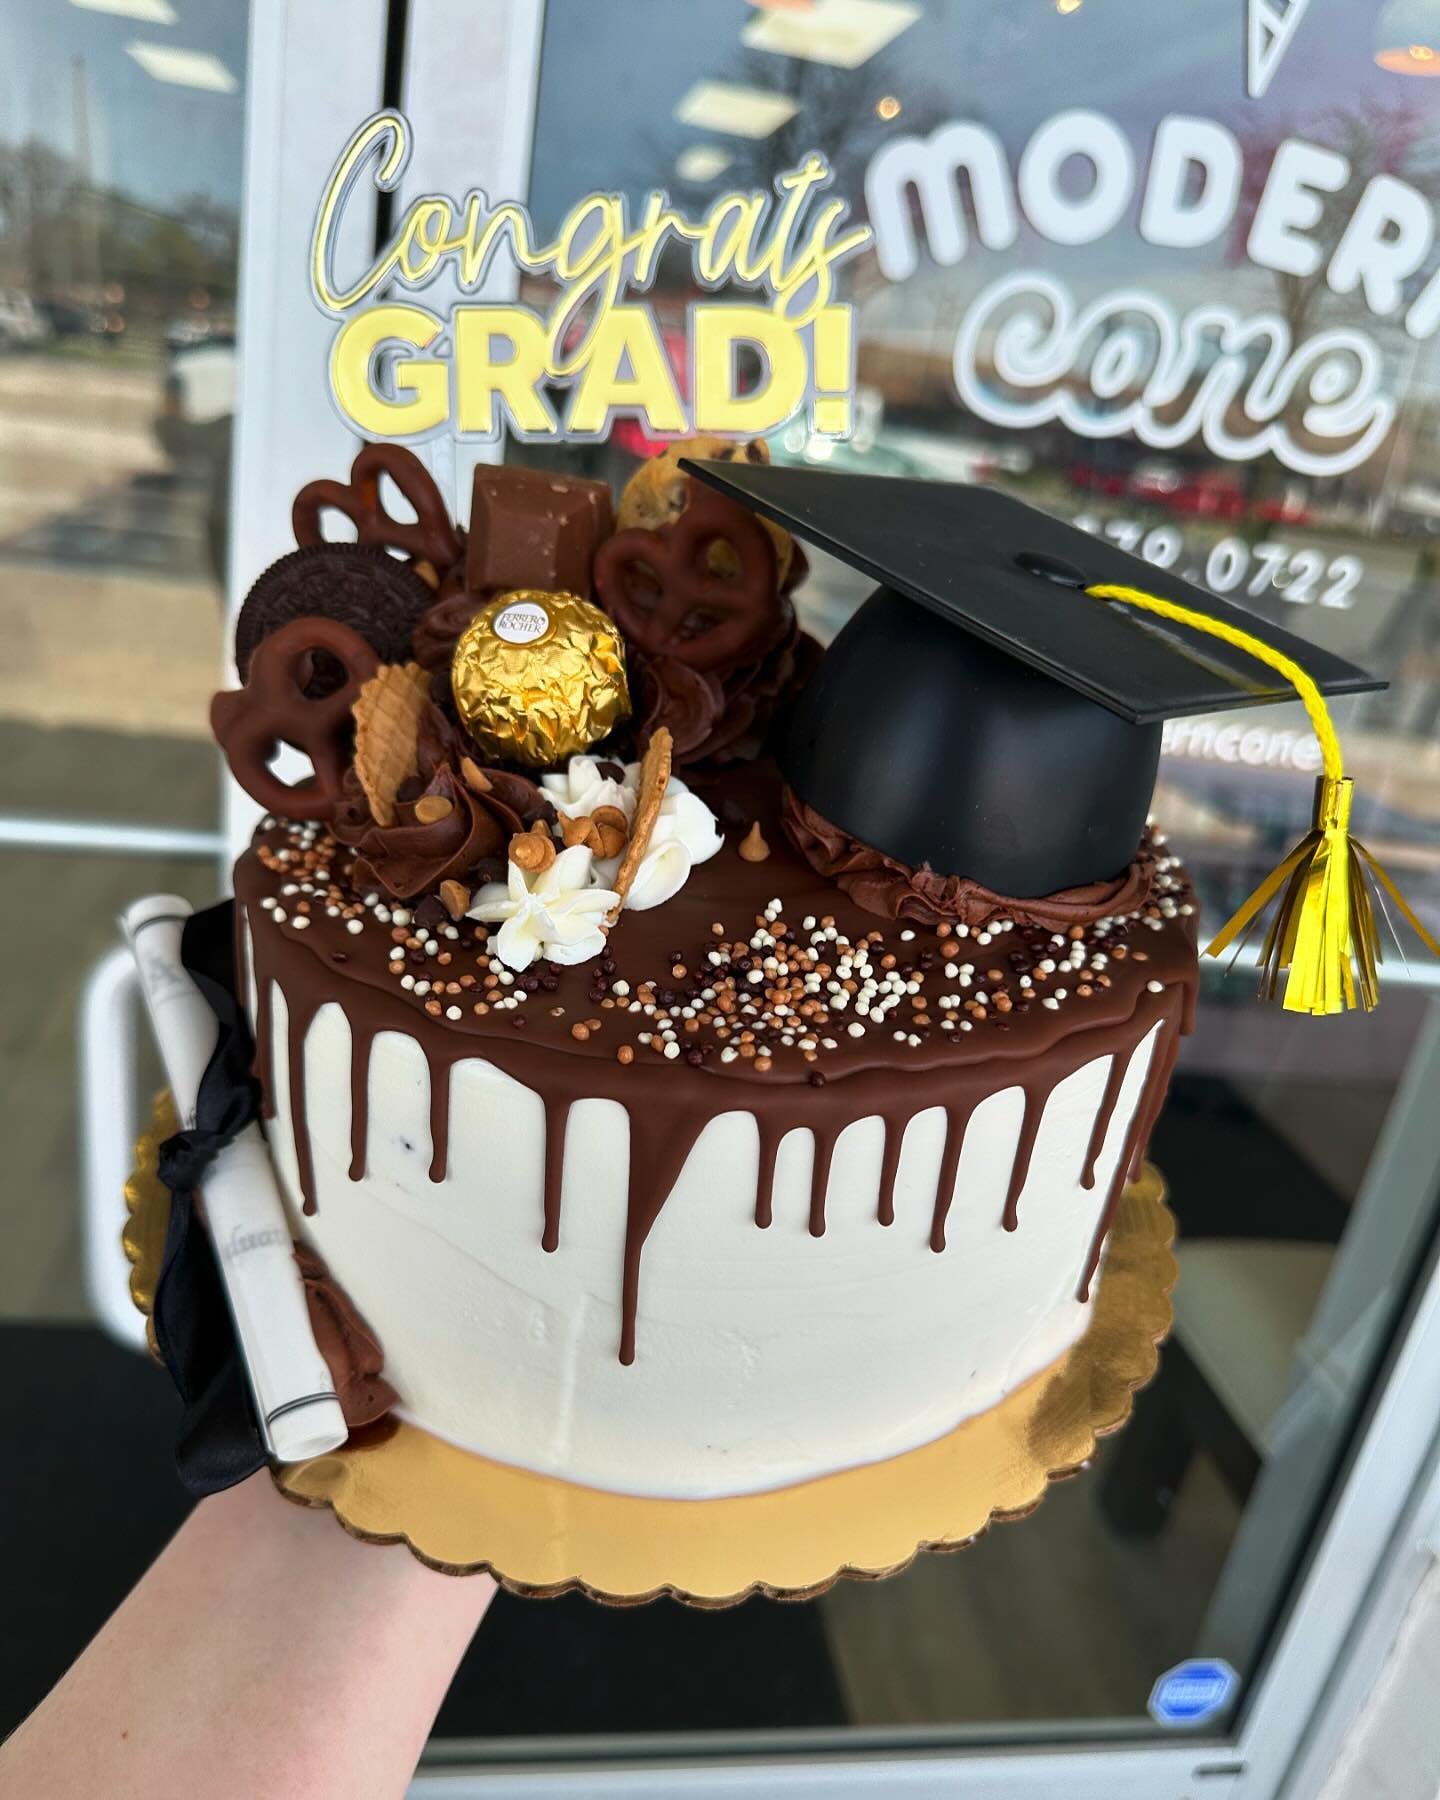 Don&rsquo;t forget to place your custom graduation ice cream cake! We need a week notice for any custom order. You can visit moderncone.com to read our FAQ 🍦🎂
📍@moderncone